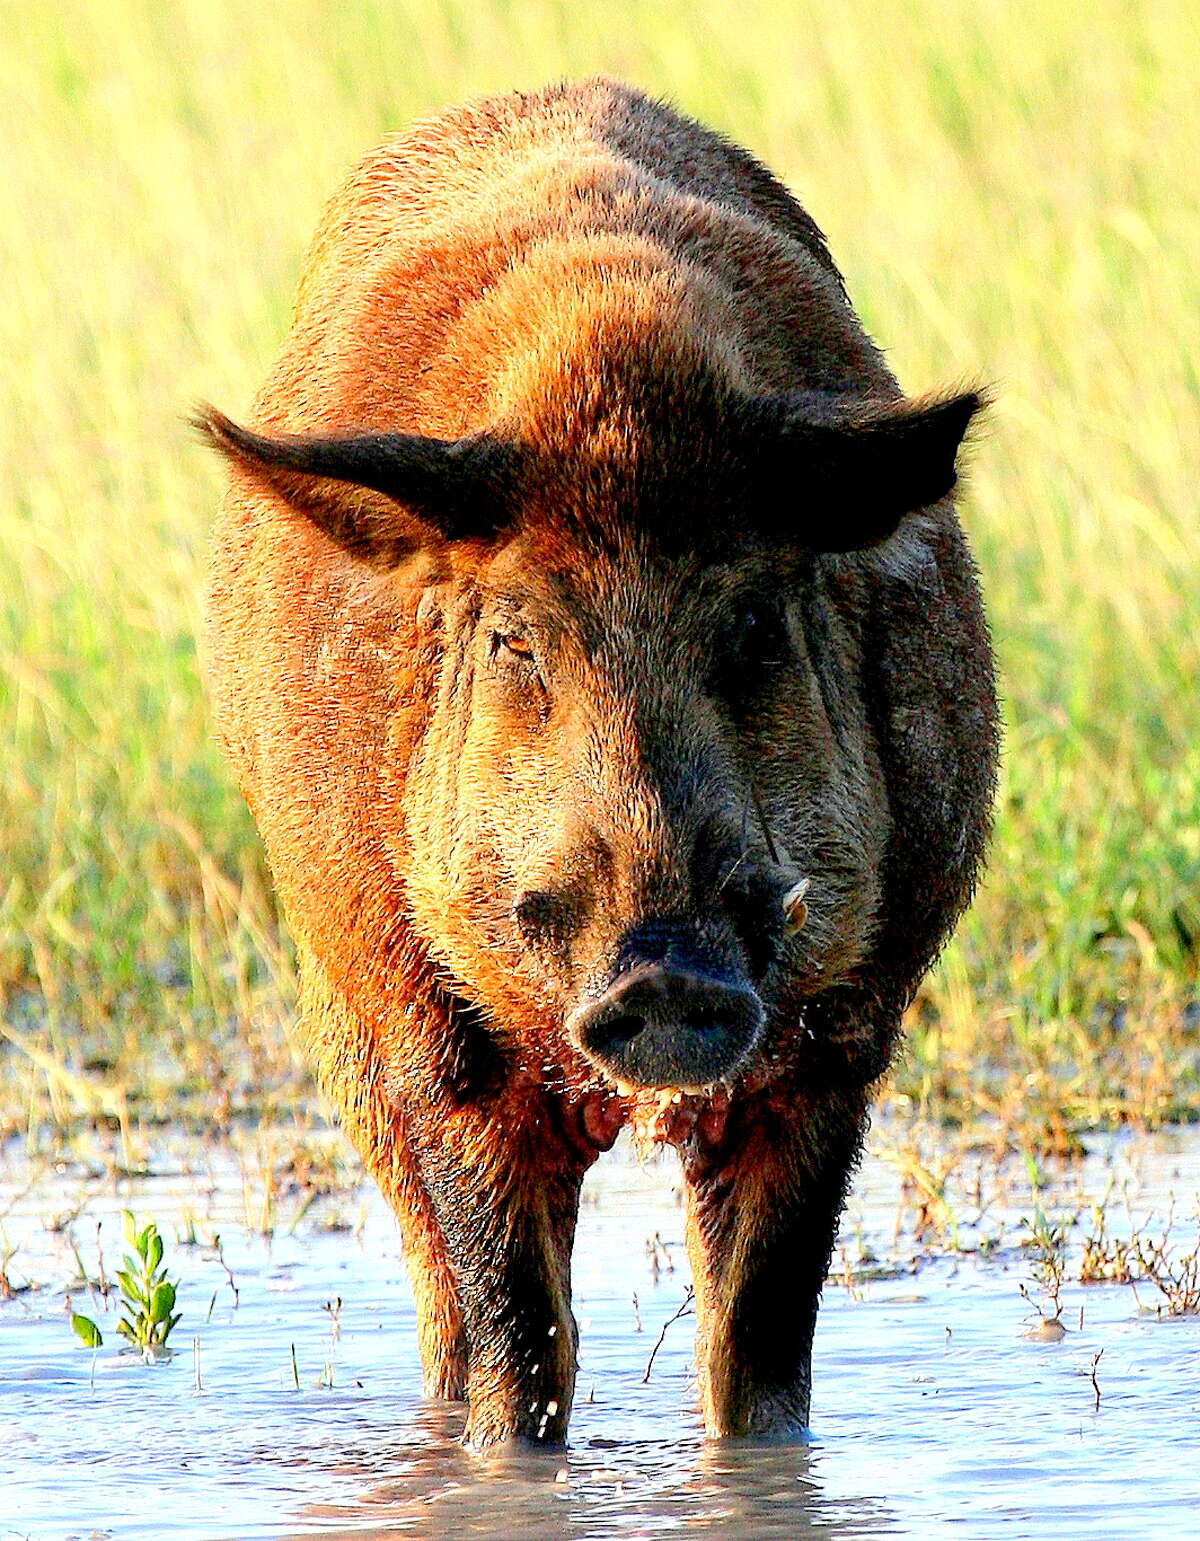 Everything is big in Texas, but not as big as some Texans believe. Research at Texas A&M-Kingsville indicates many Texans grossly overestimate the weight of feral hogs, guessing the pigs to be twice as heavy as they actually are.